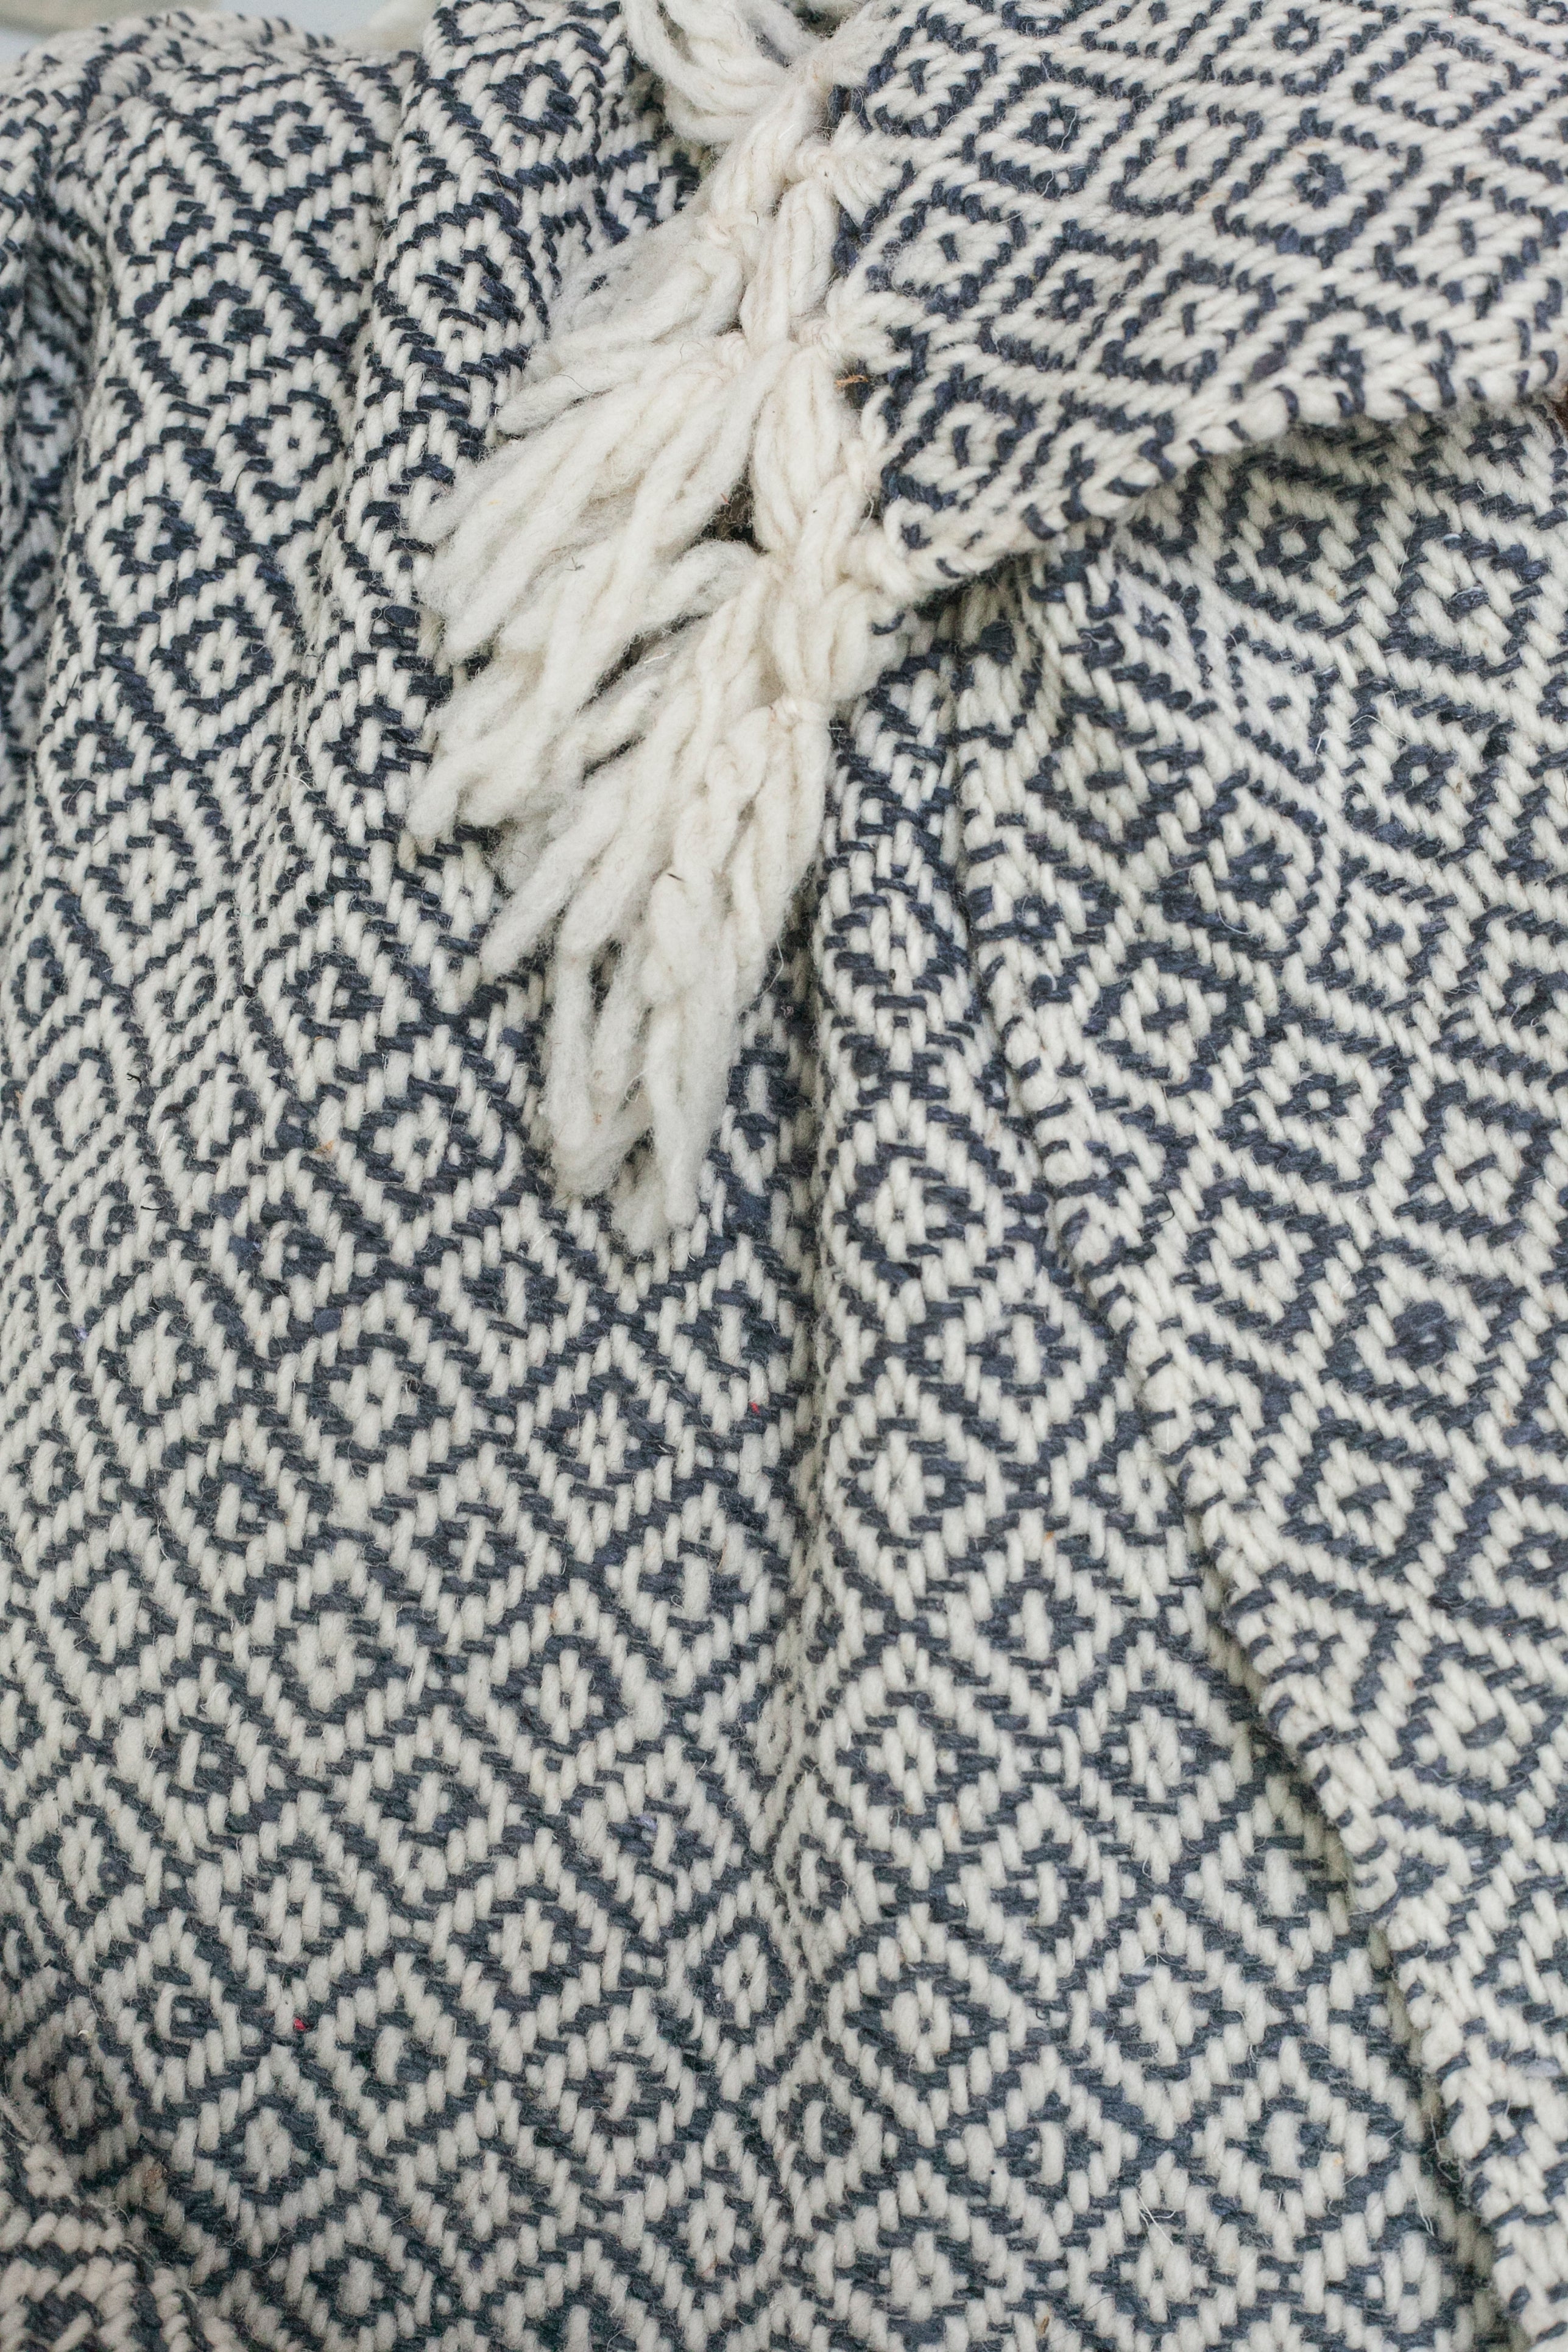 Detail of charcoal grey and white diamond weaving and tied tassels from a wool throw blanket